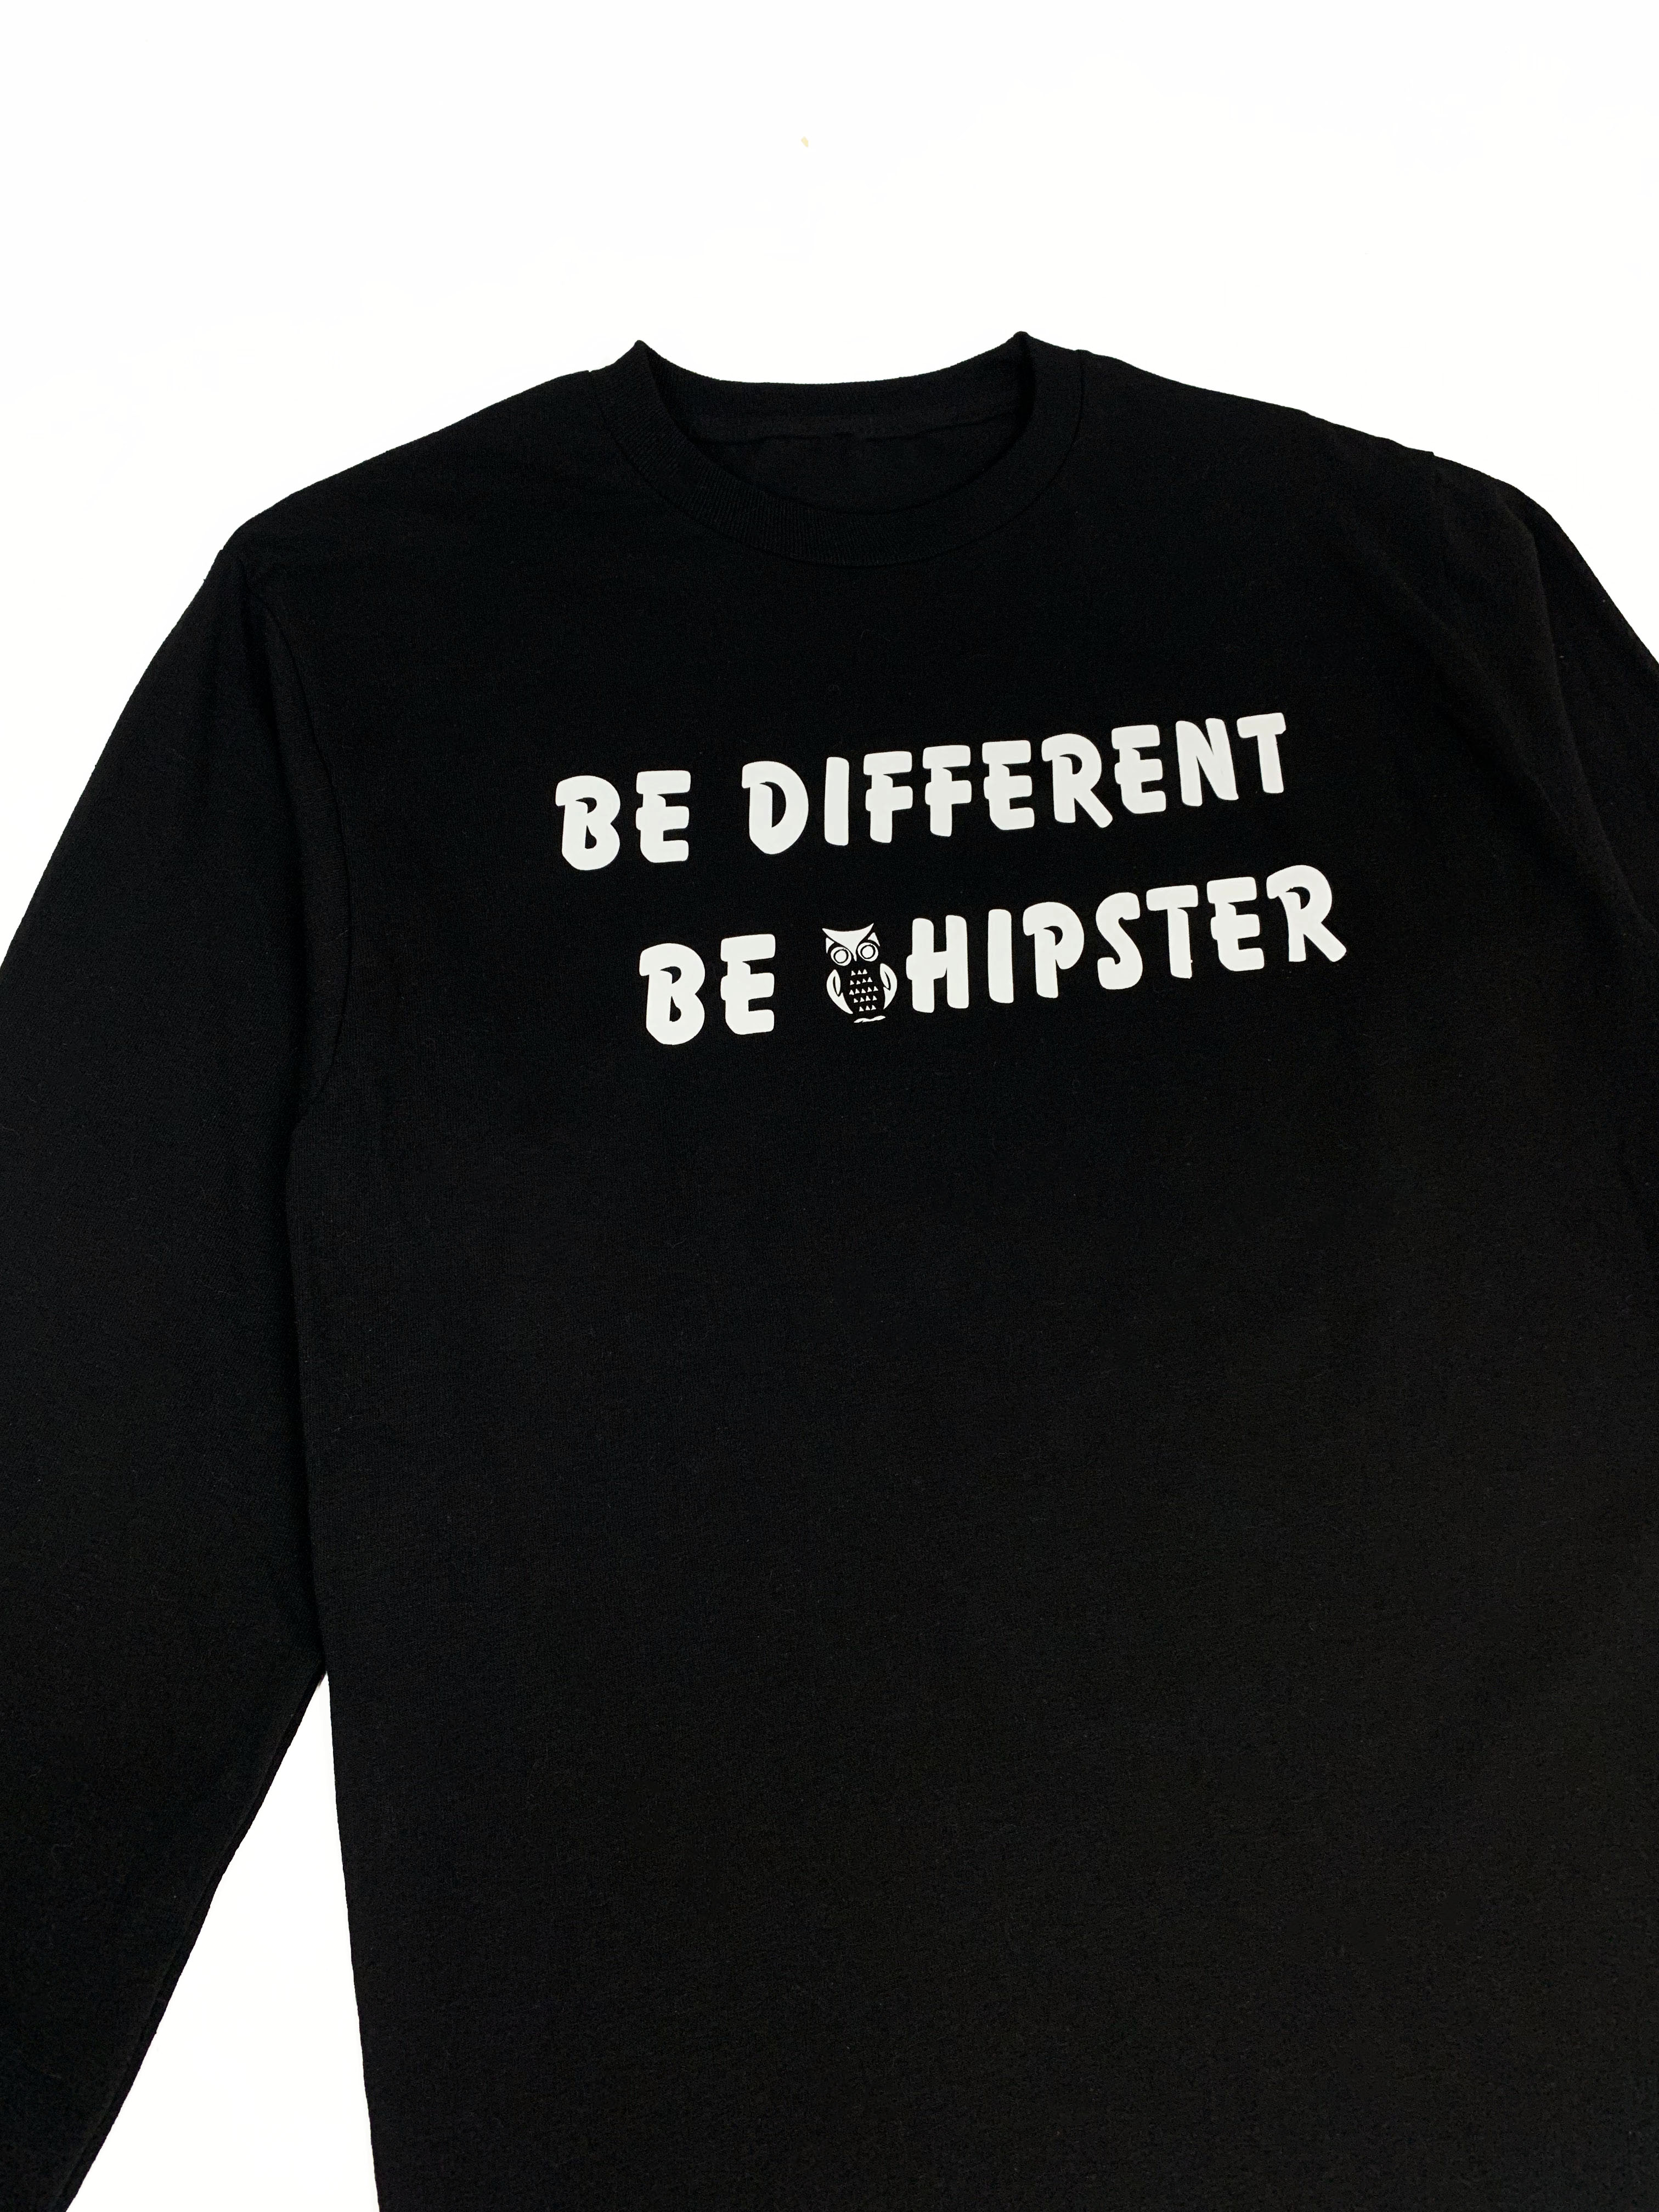 Long Sleeve with Be Different Be Hipster print - Black